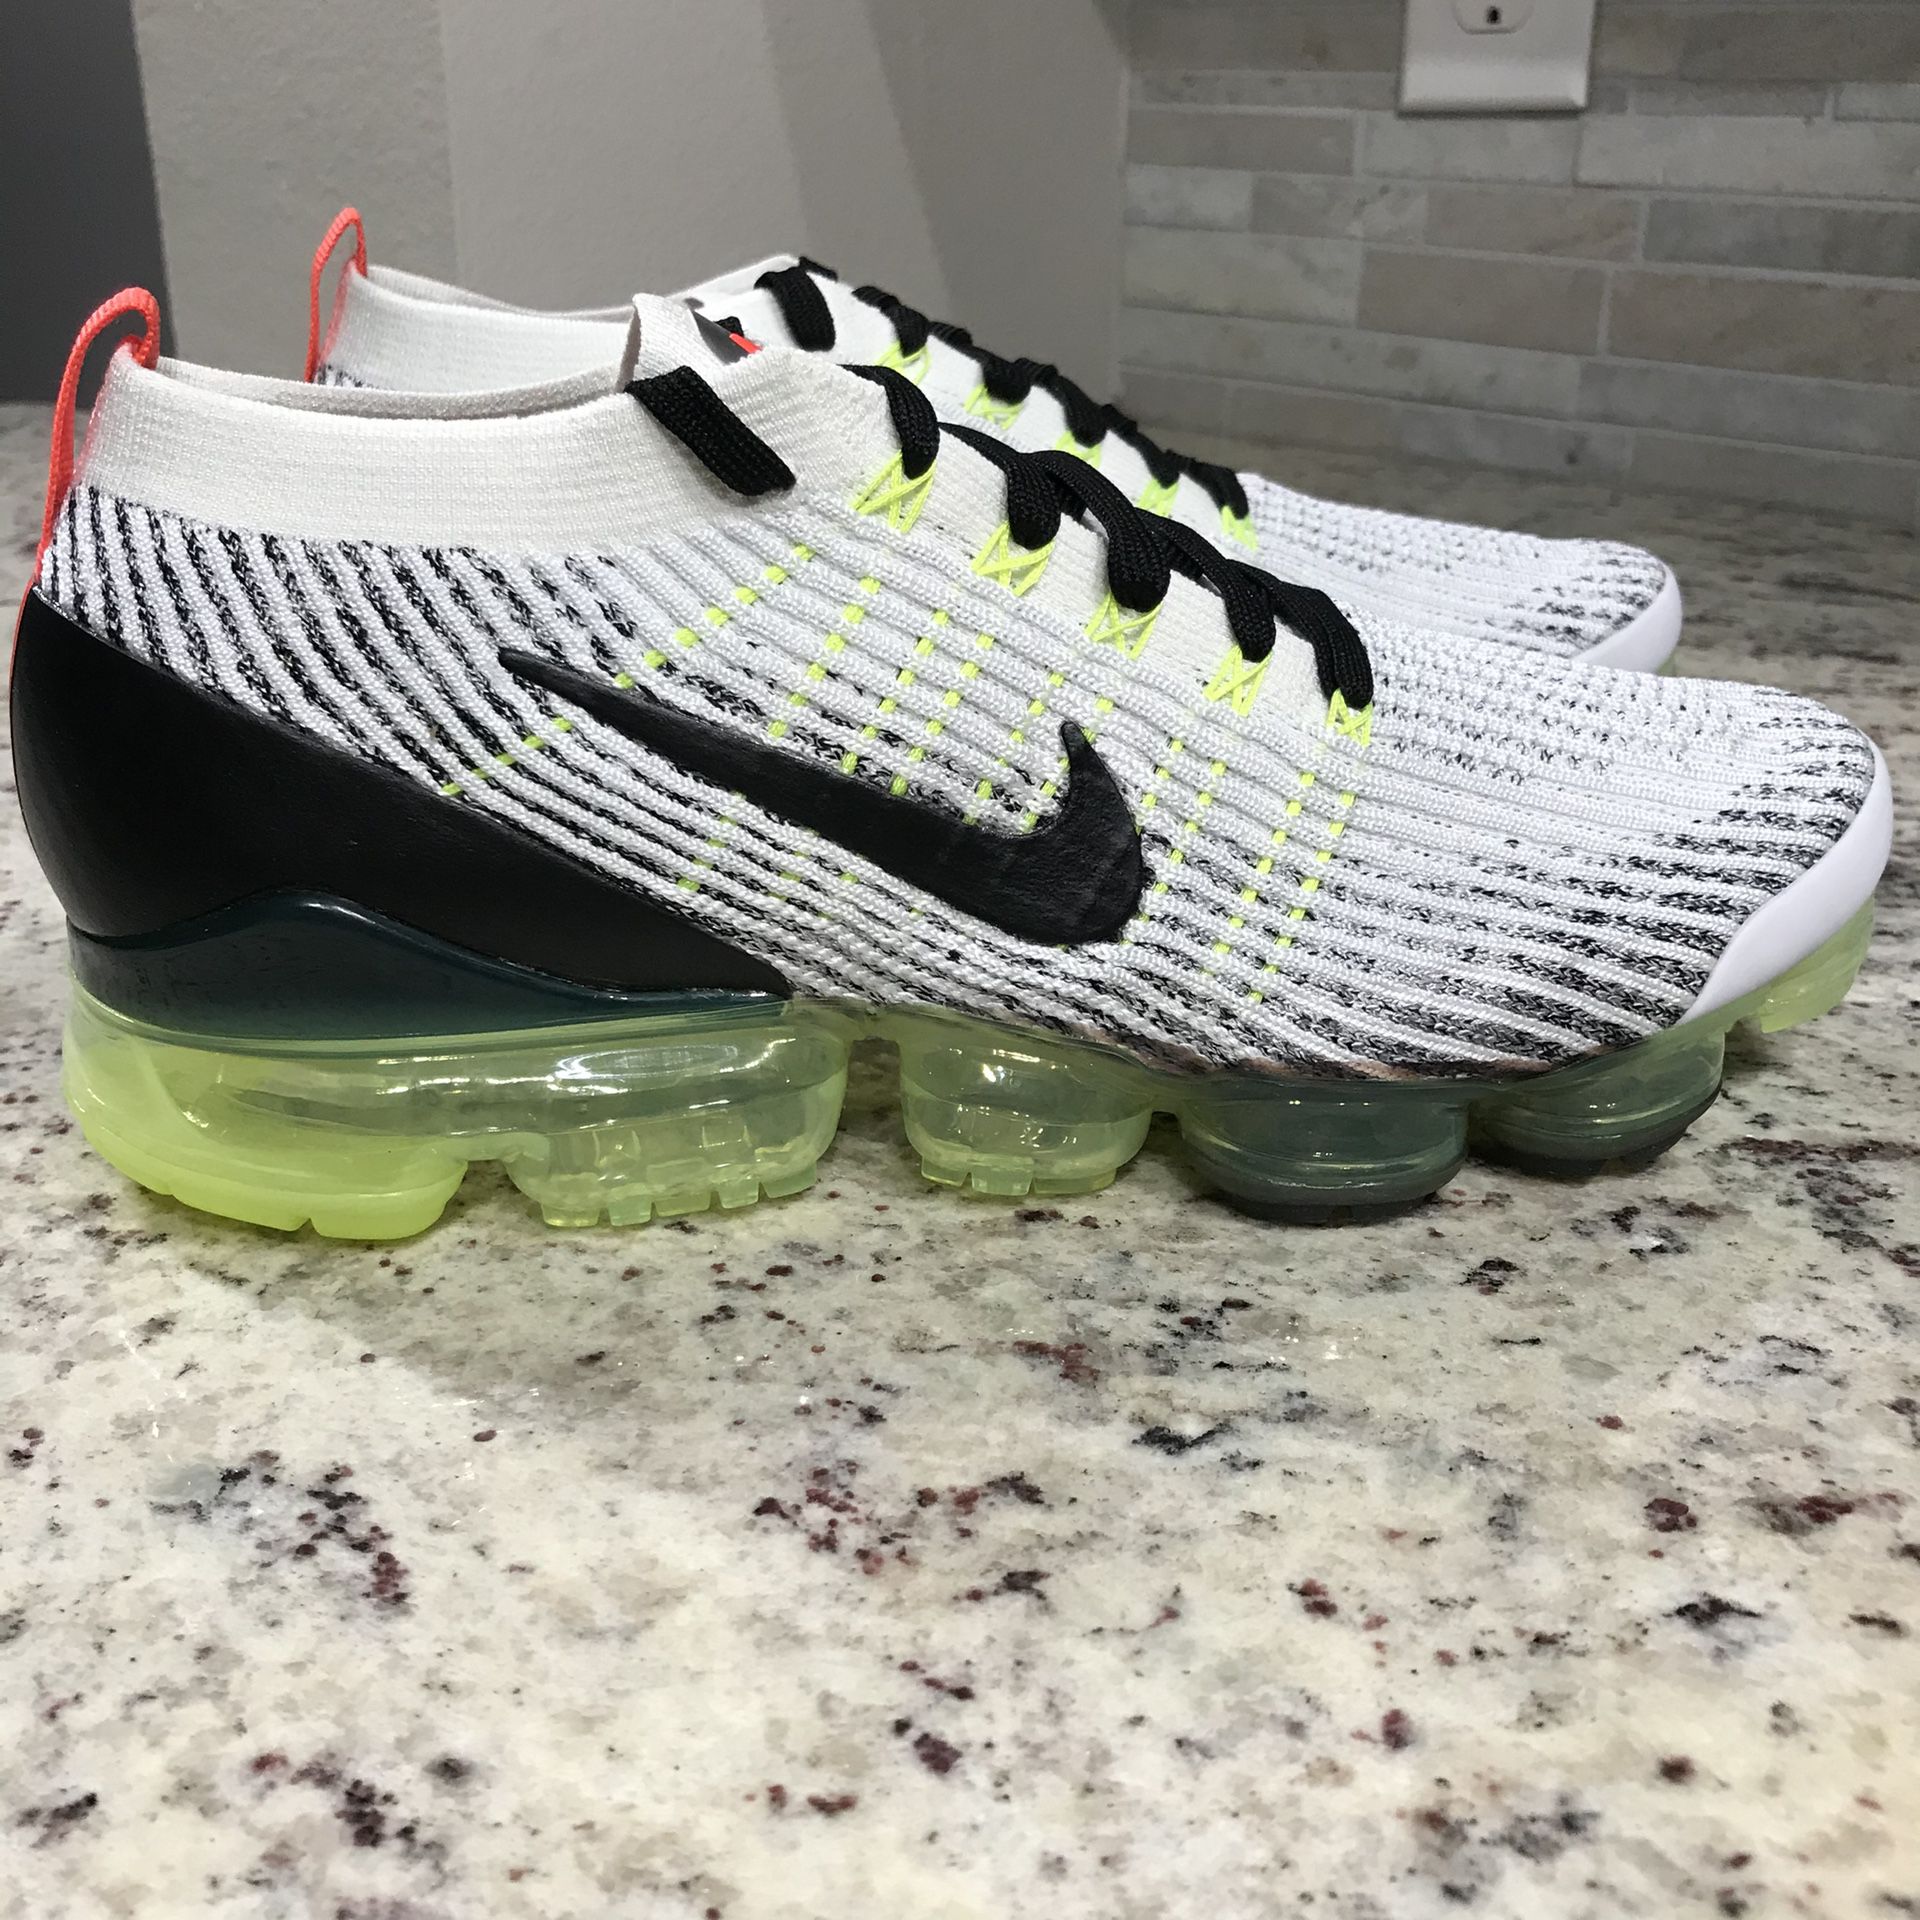 🆕 BRAND NEW Nike Air Vapormax Flyknit 3 Shoes